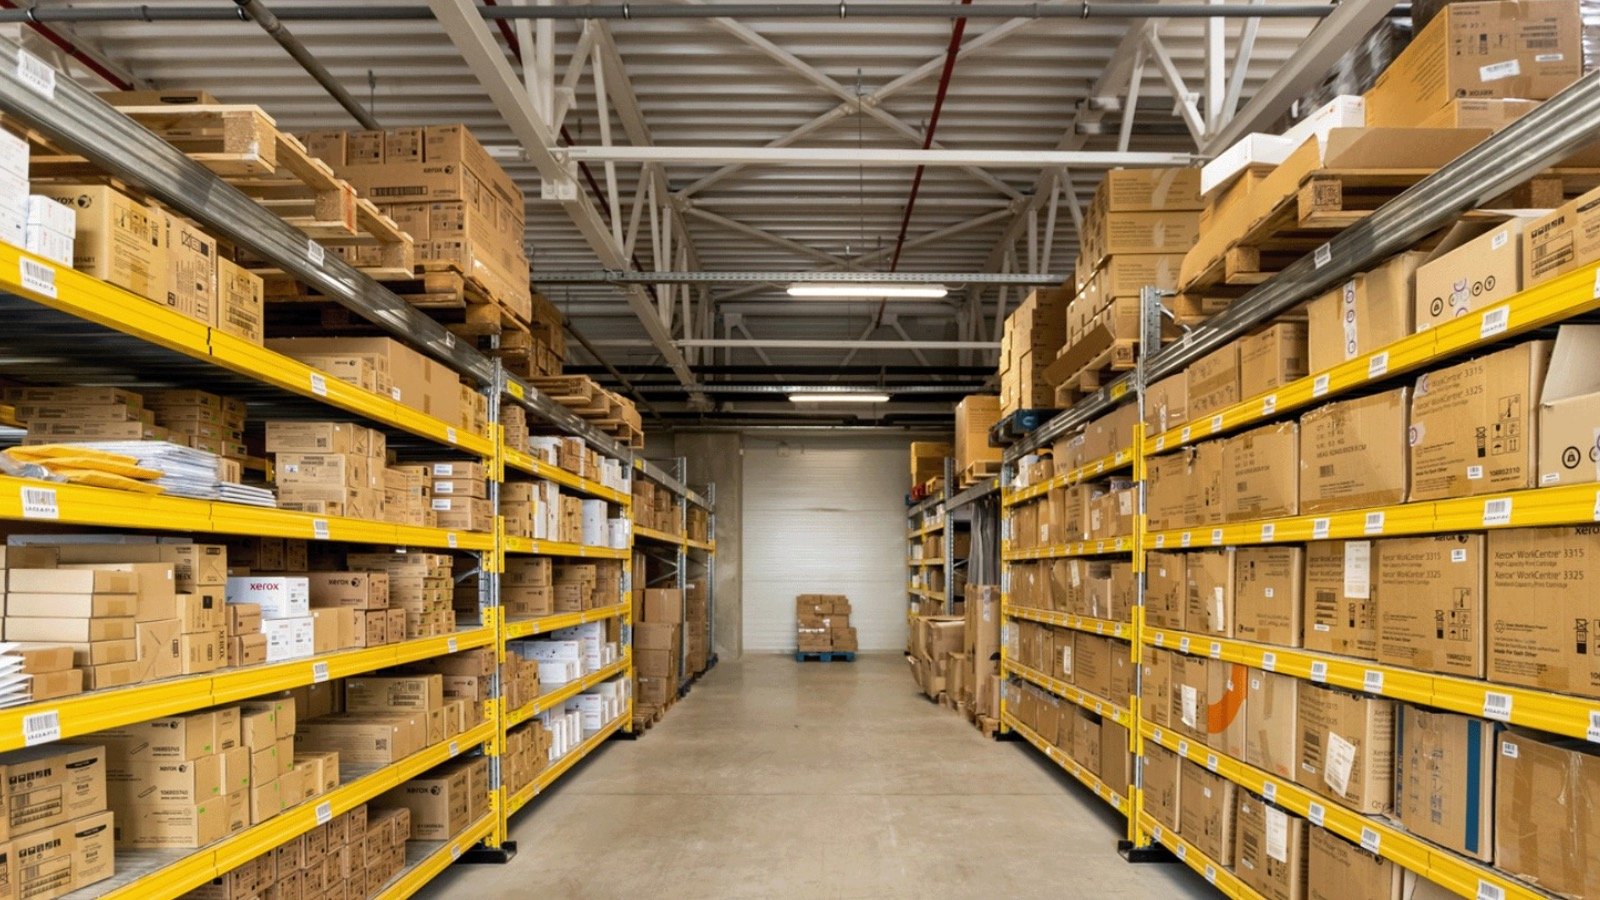 packages arranged on shelves in warehouse